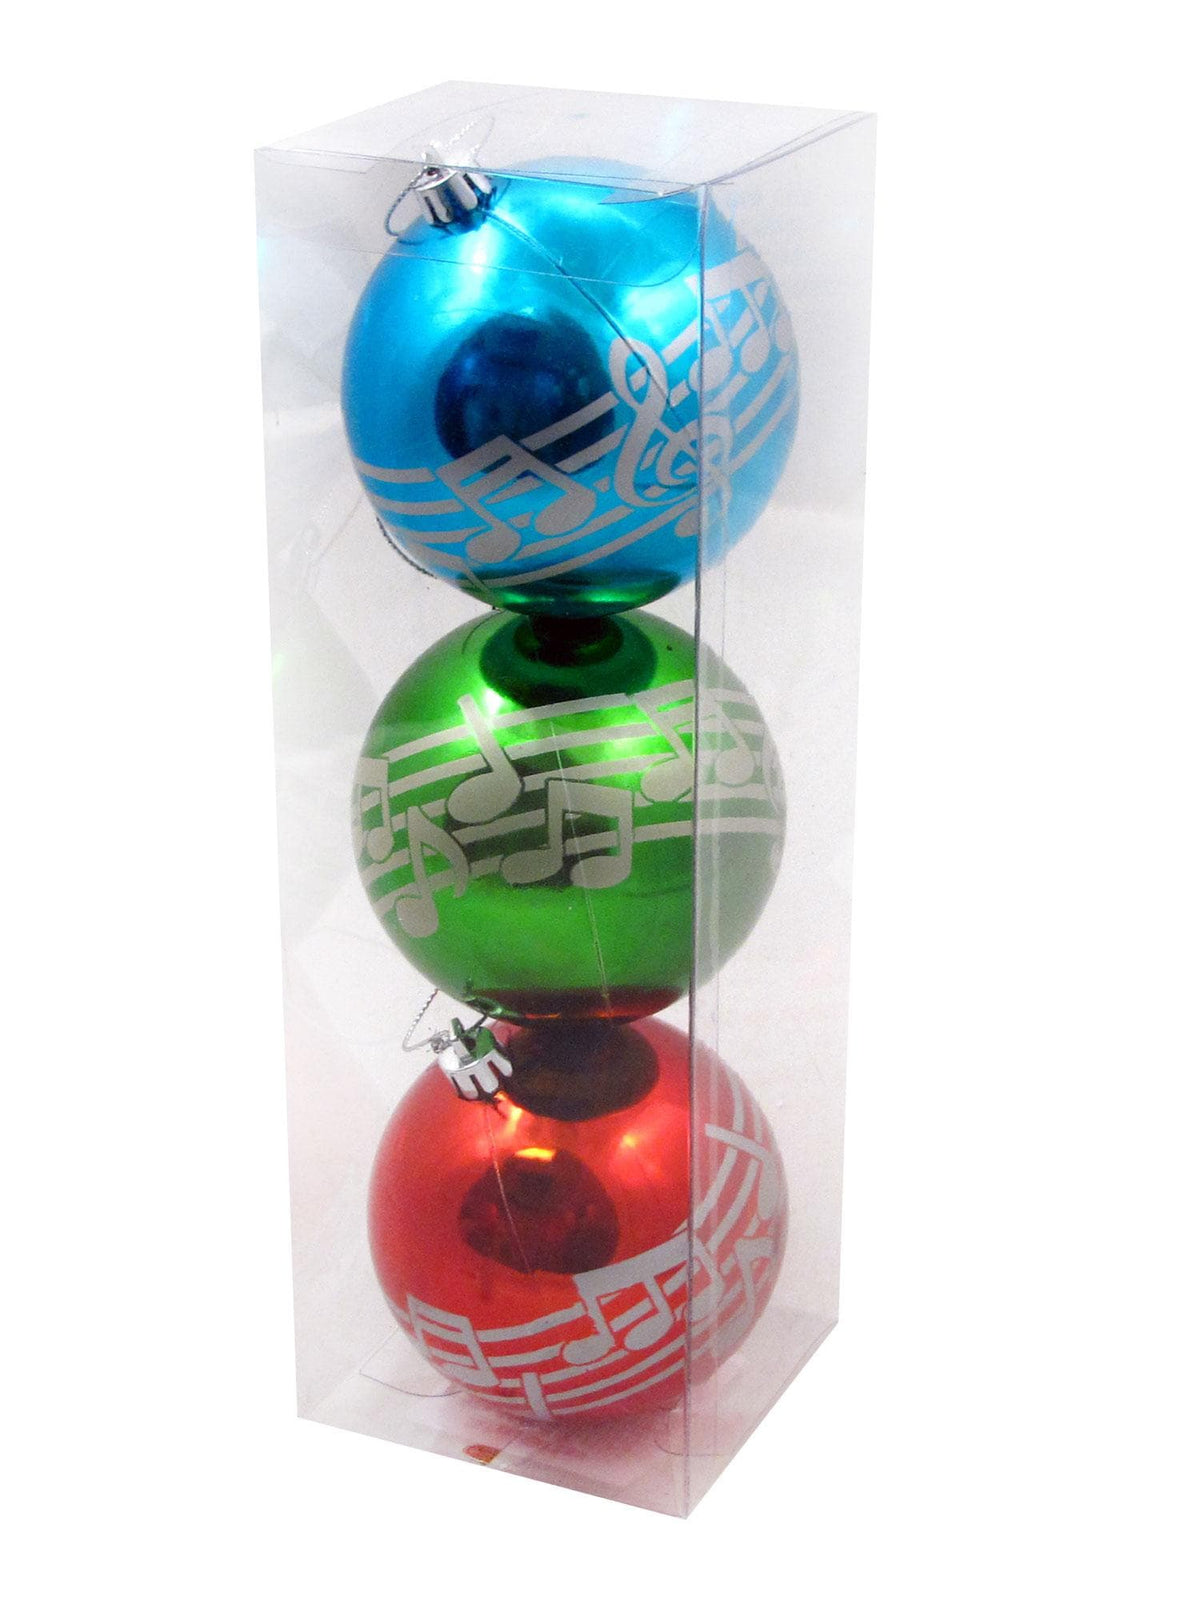 Music Note Ornaments - 3 Pack of Christmas Tree Bulbs